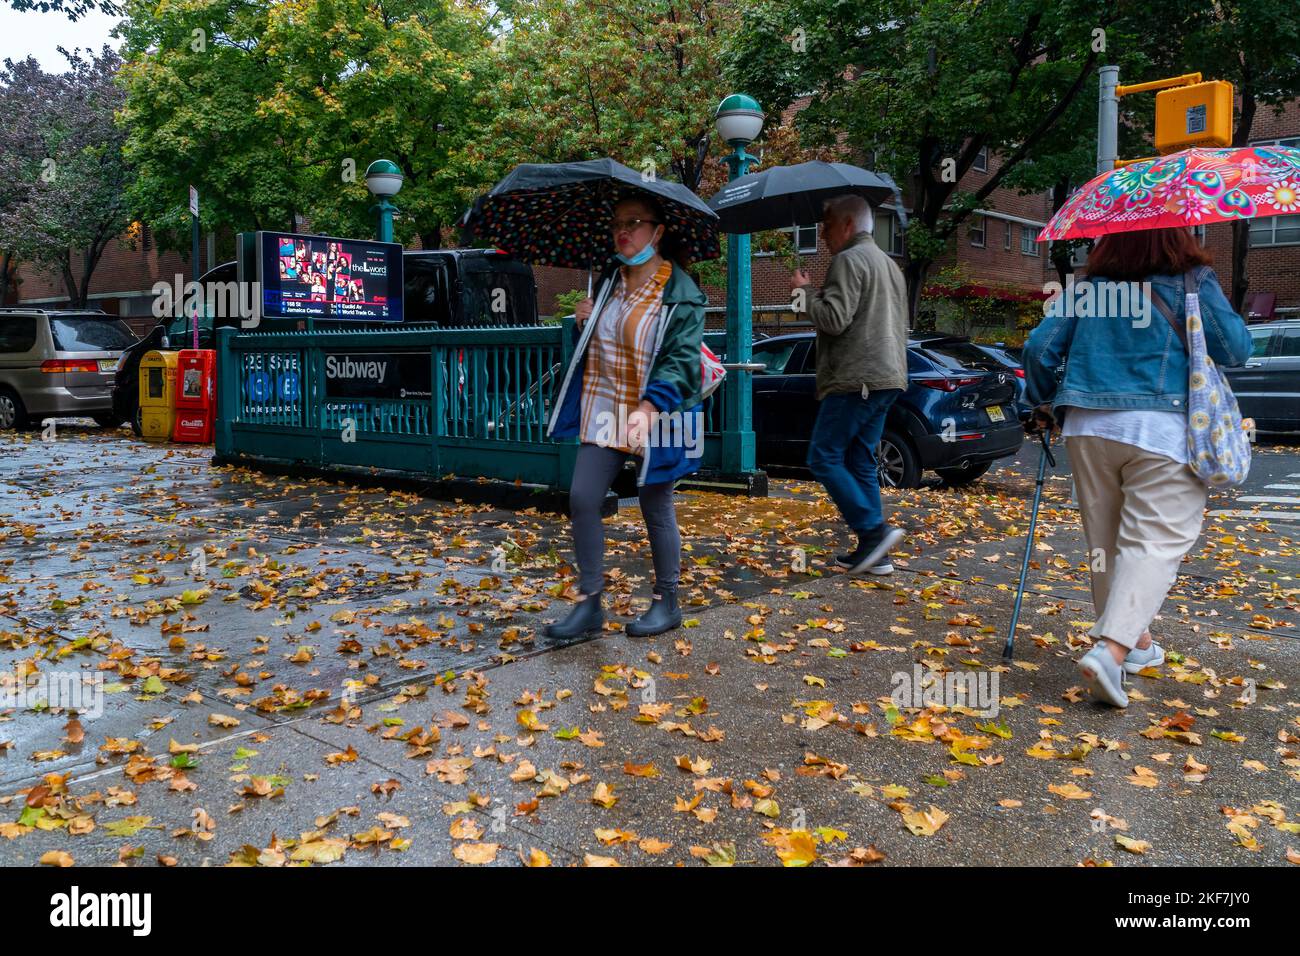 Autumn leaves litter the streets after the remains of Hurricane Nicole passes through New York in Chelsea, on Friday, November 11, 2022. The city is making an effort to clean catch basins and storm drains to prevent localized flooding. (© Richard B. Levine) Stock Photo